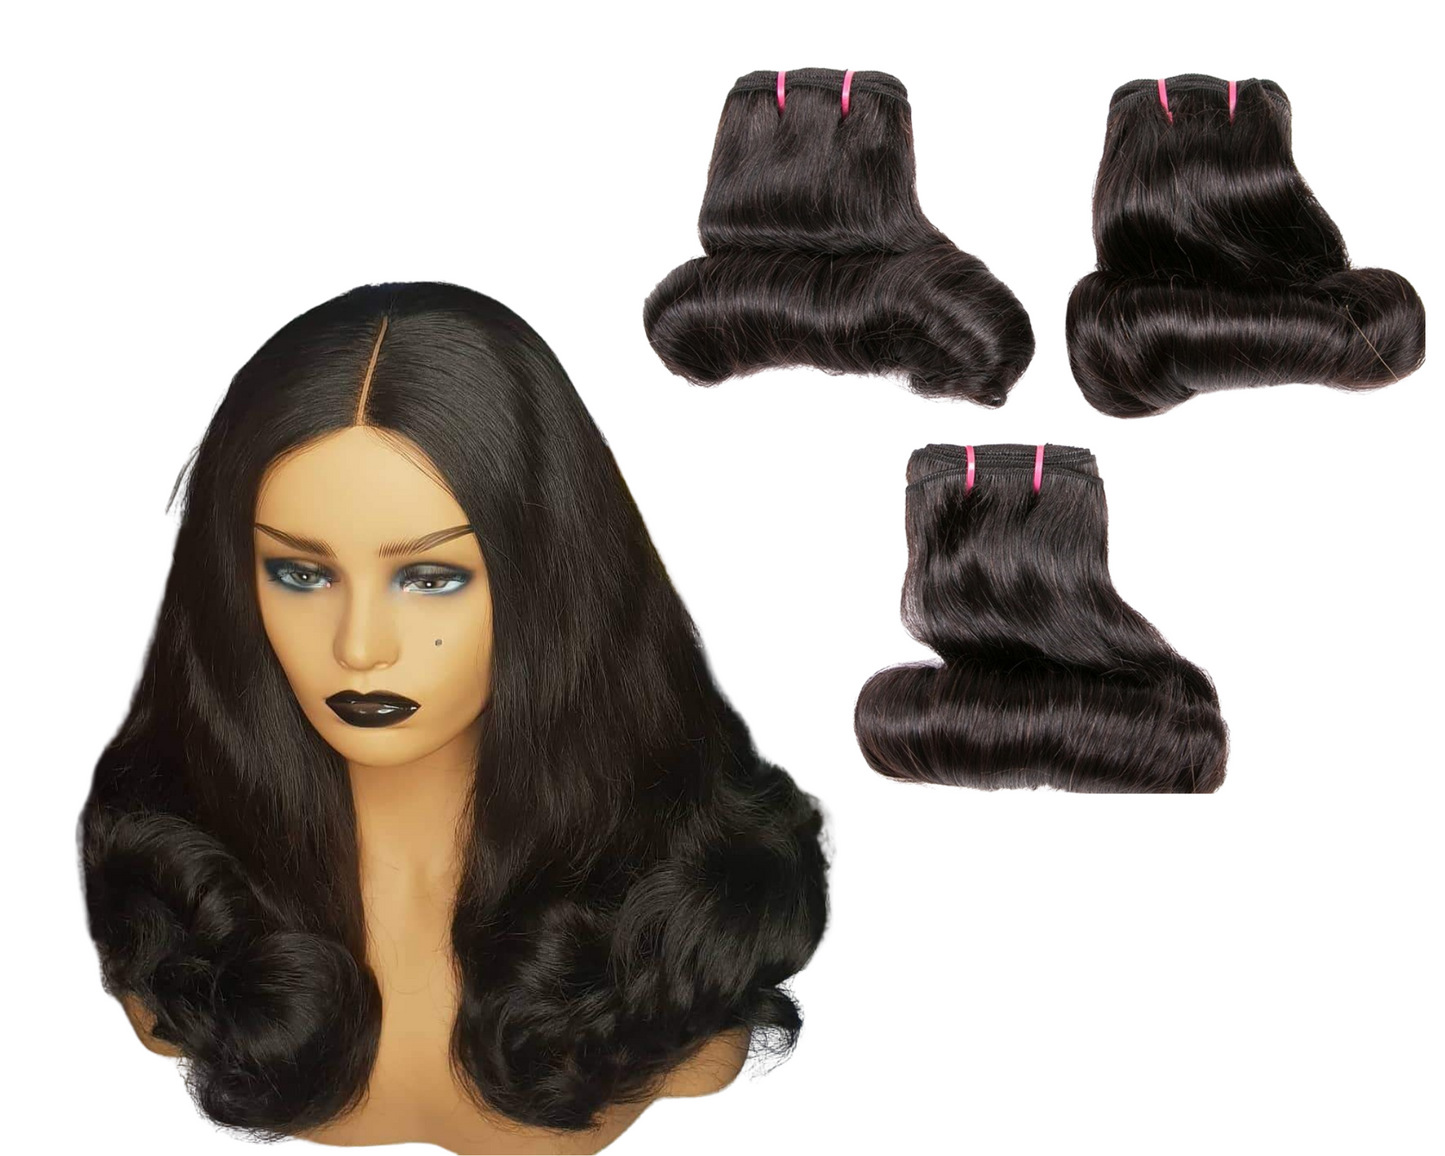 Super Double Drawn 12A Grade EGG CURL BUNDLES with CLOSURES & FRONTAL